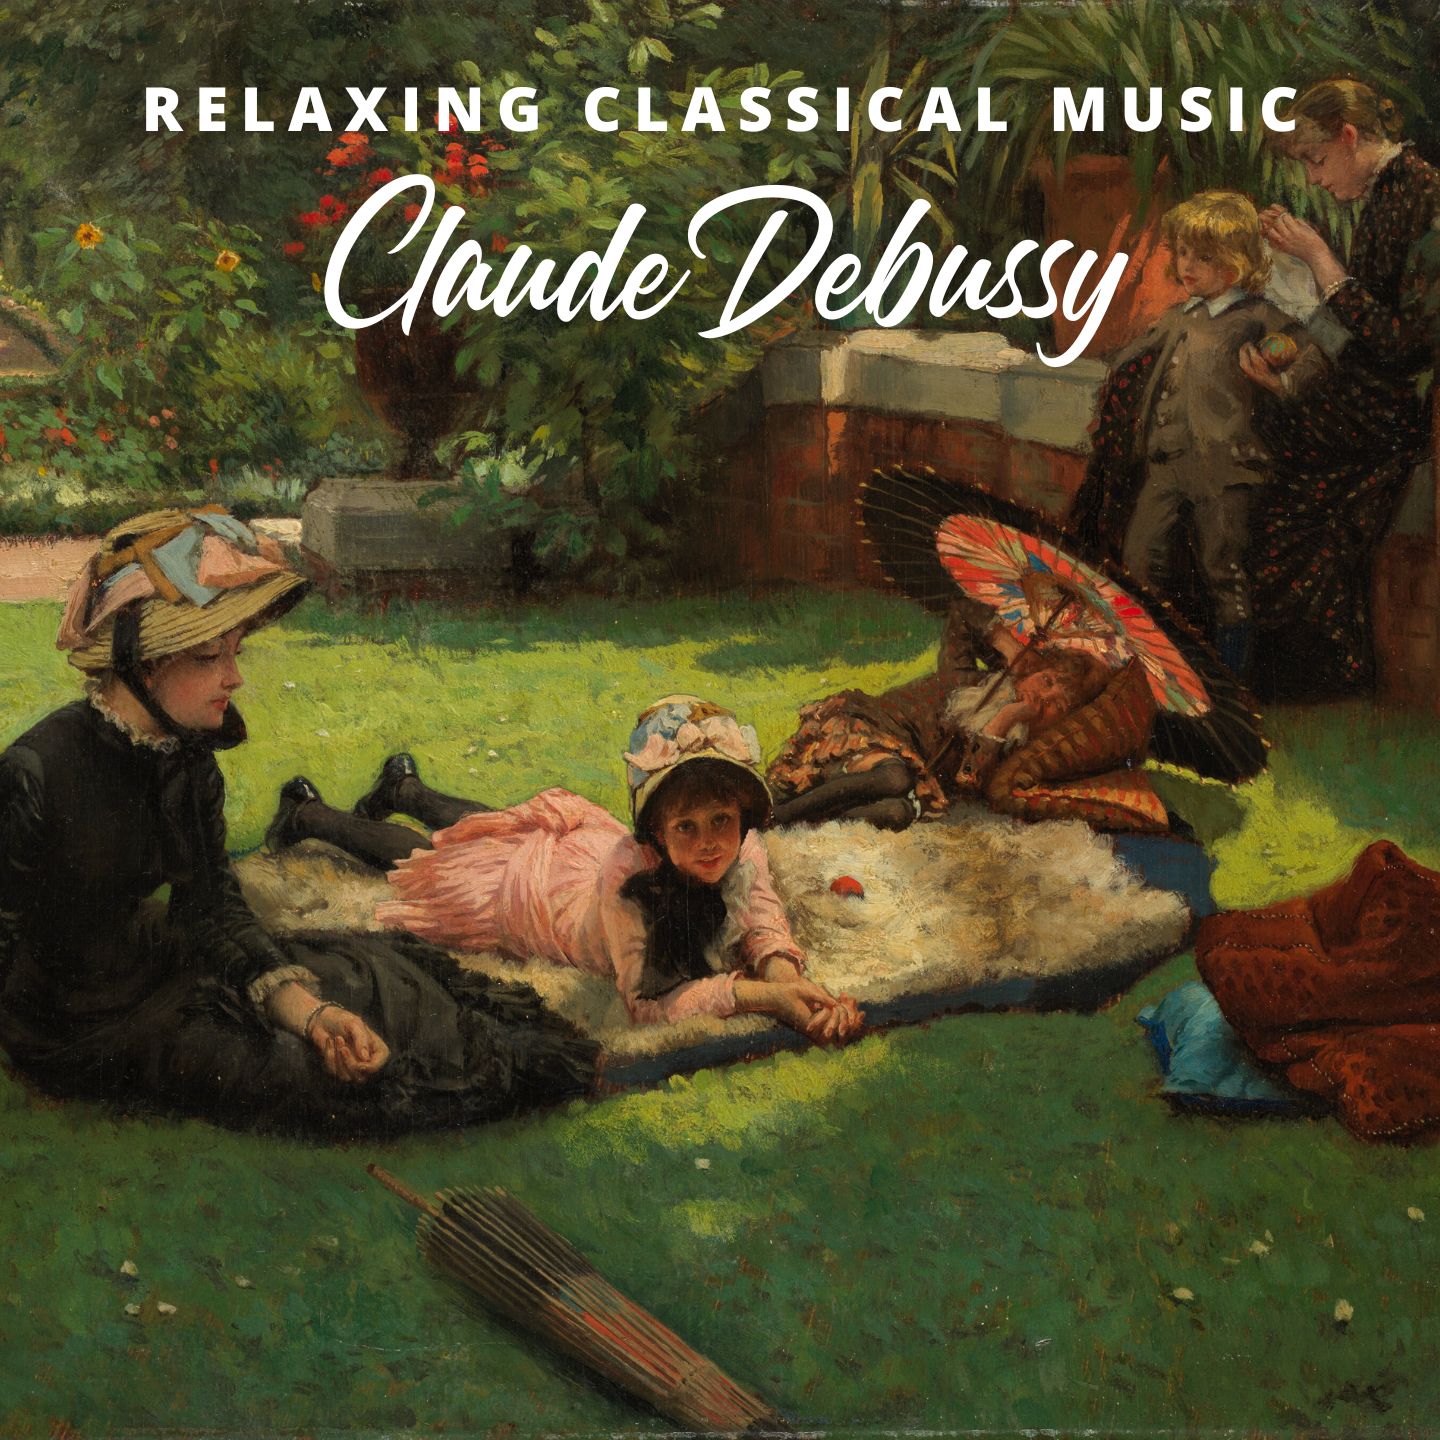 Debussy: Classical Music for Relaxation